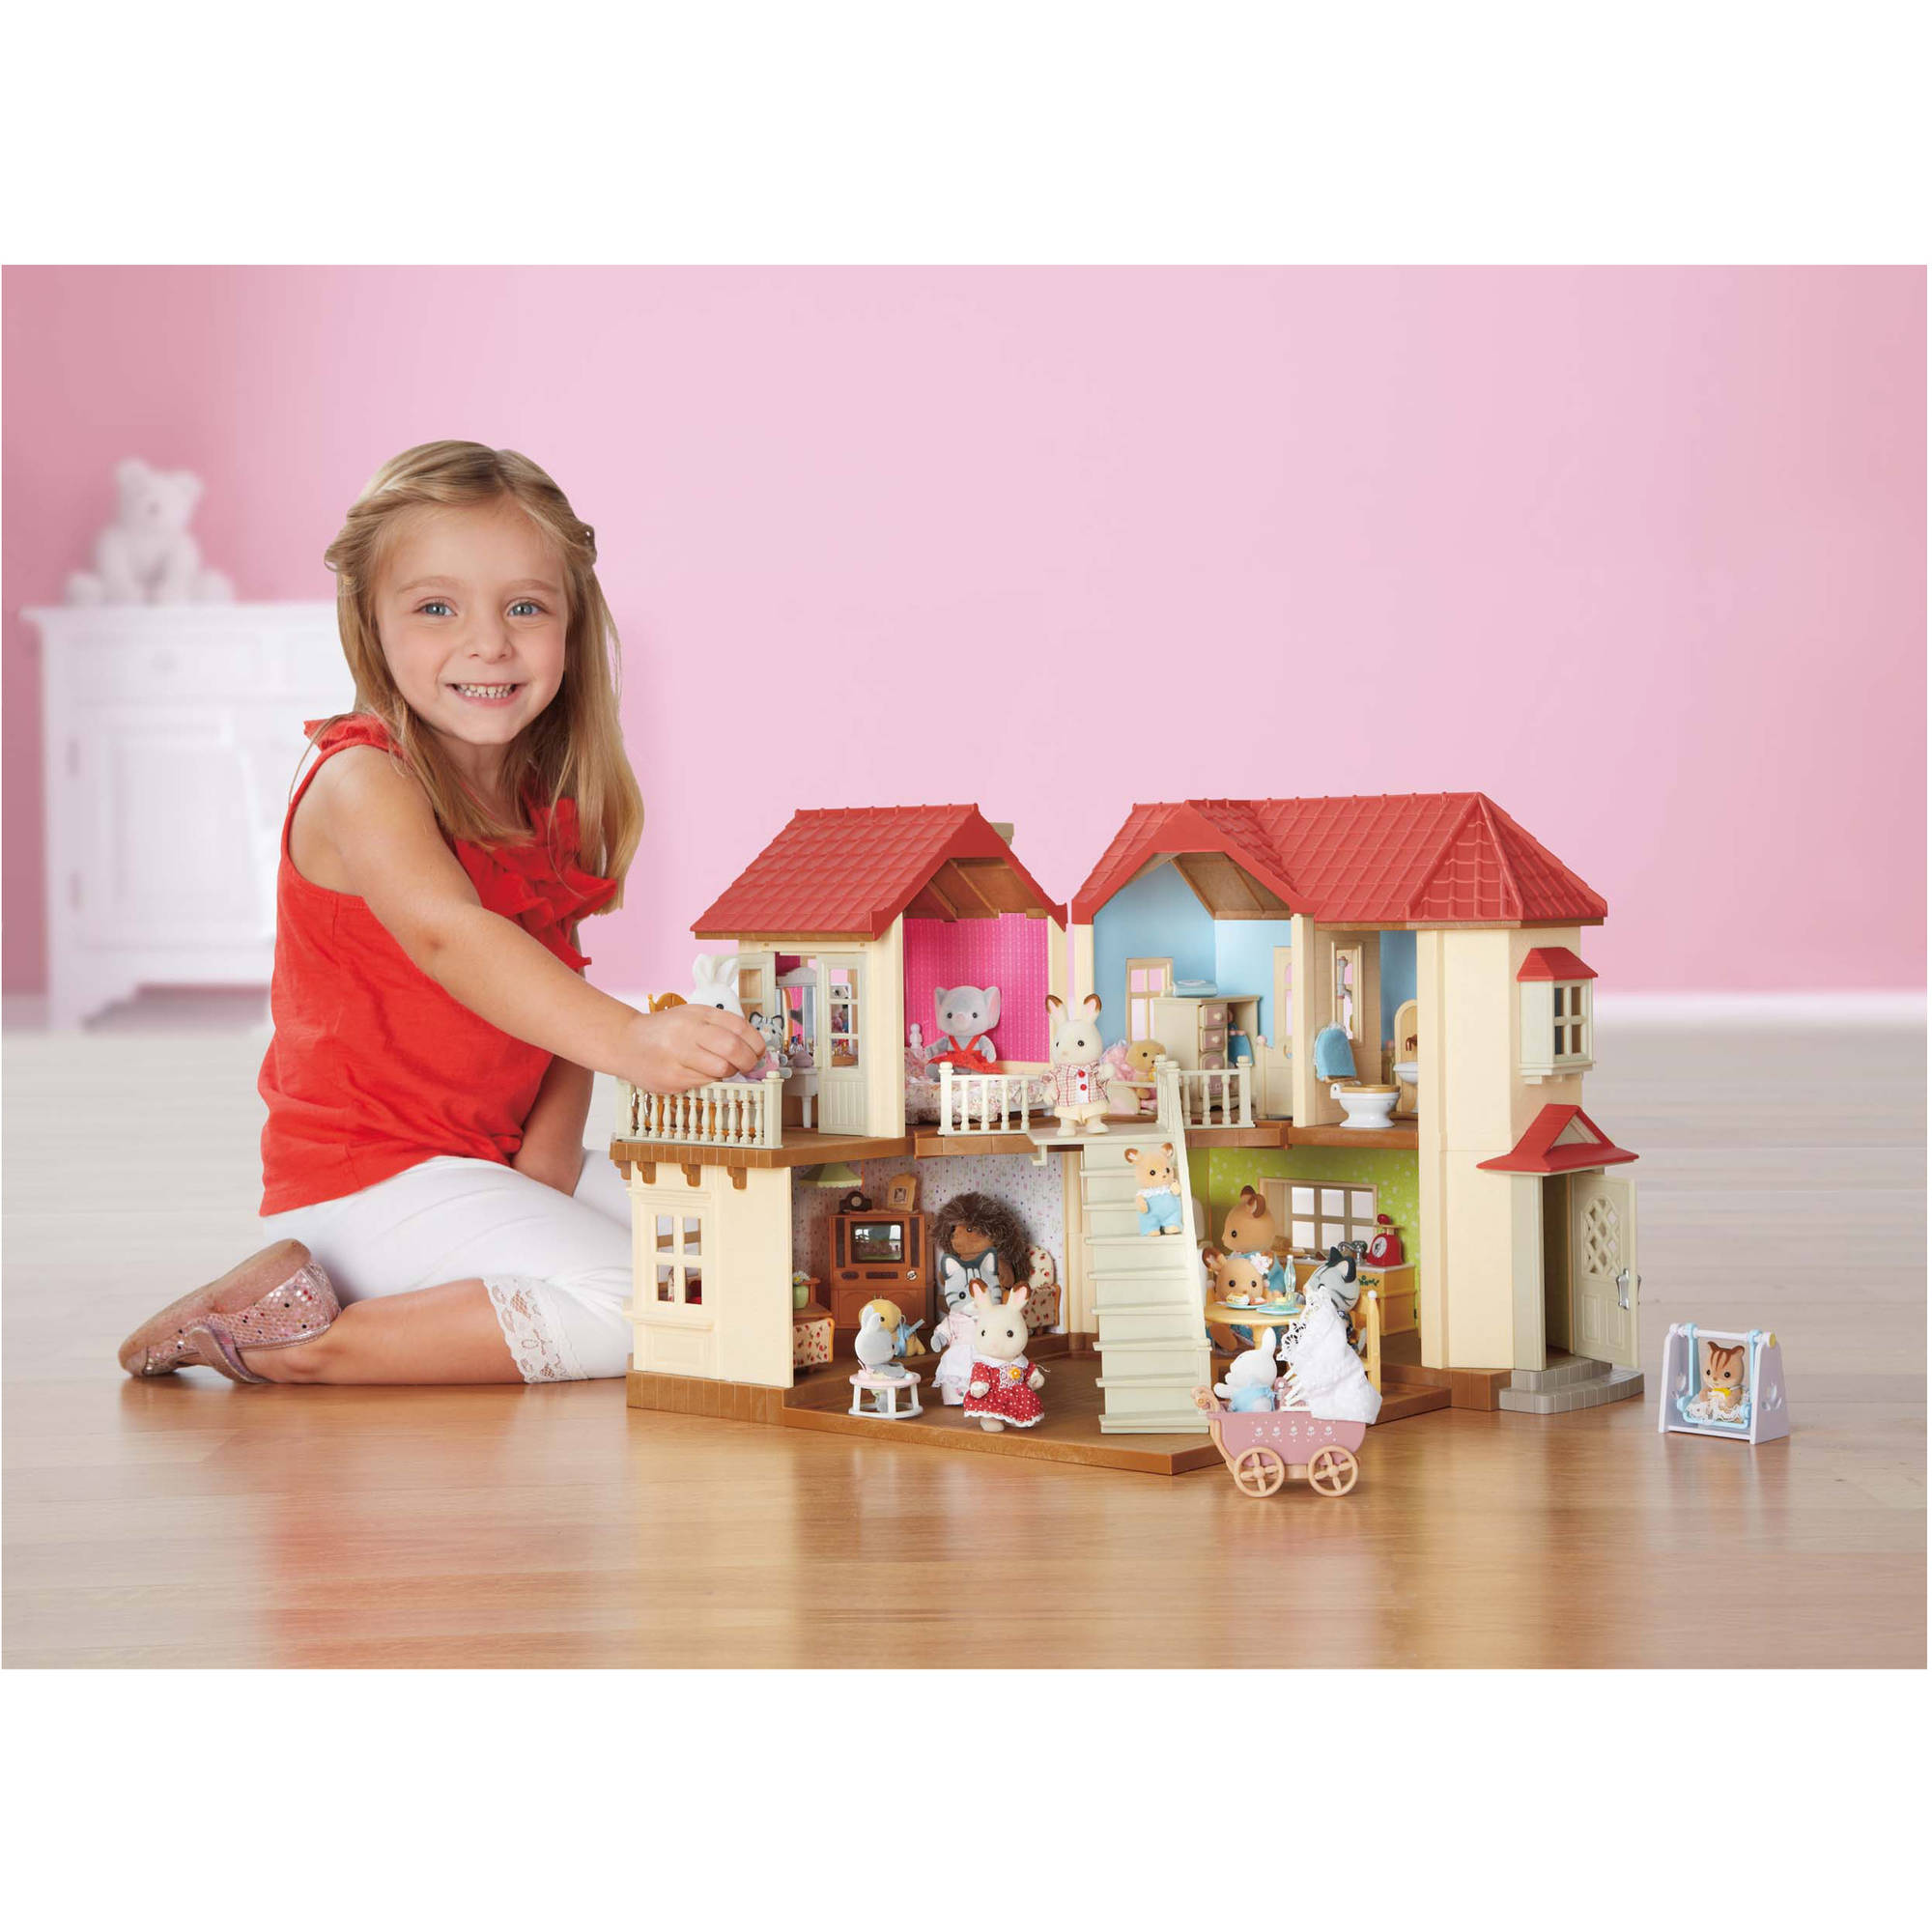 Calico Critters Luxury Townhome Gift Set - image 5 of 18